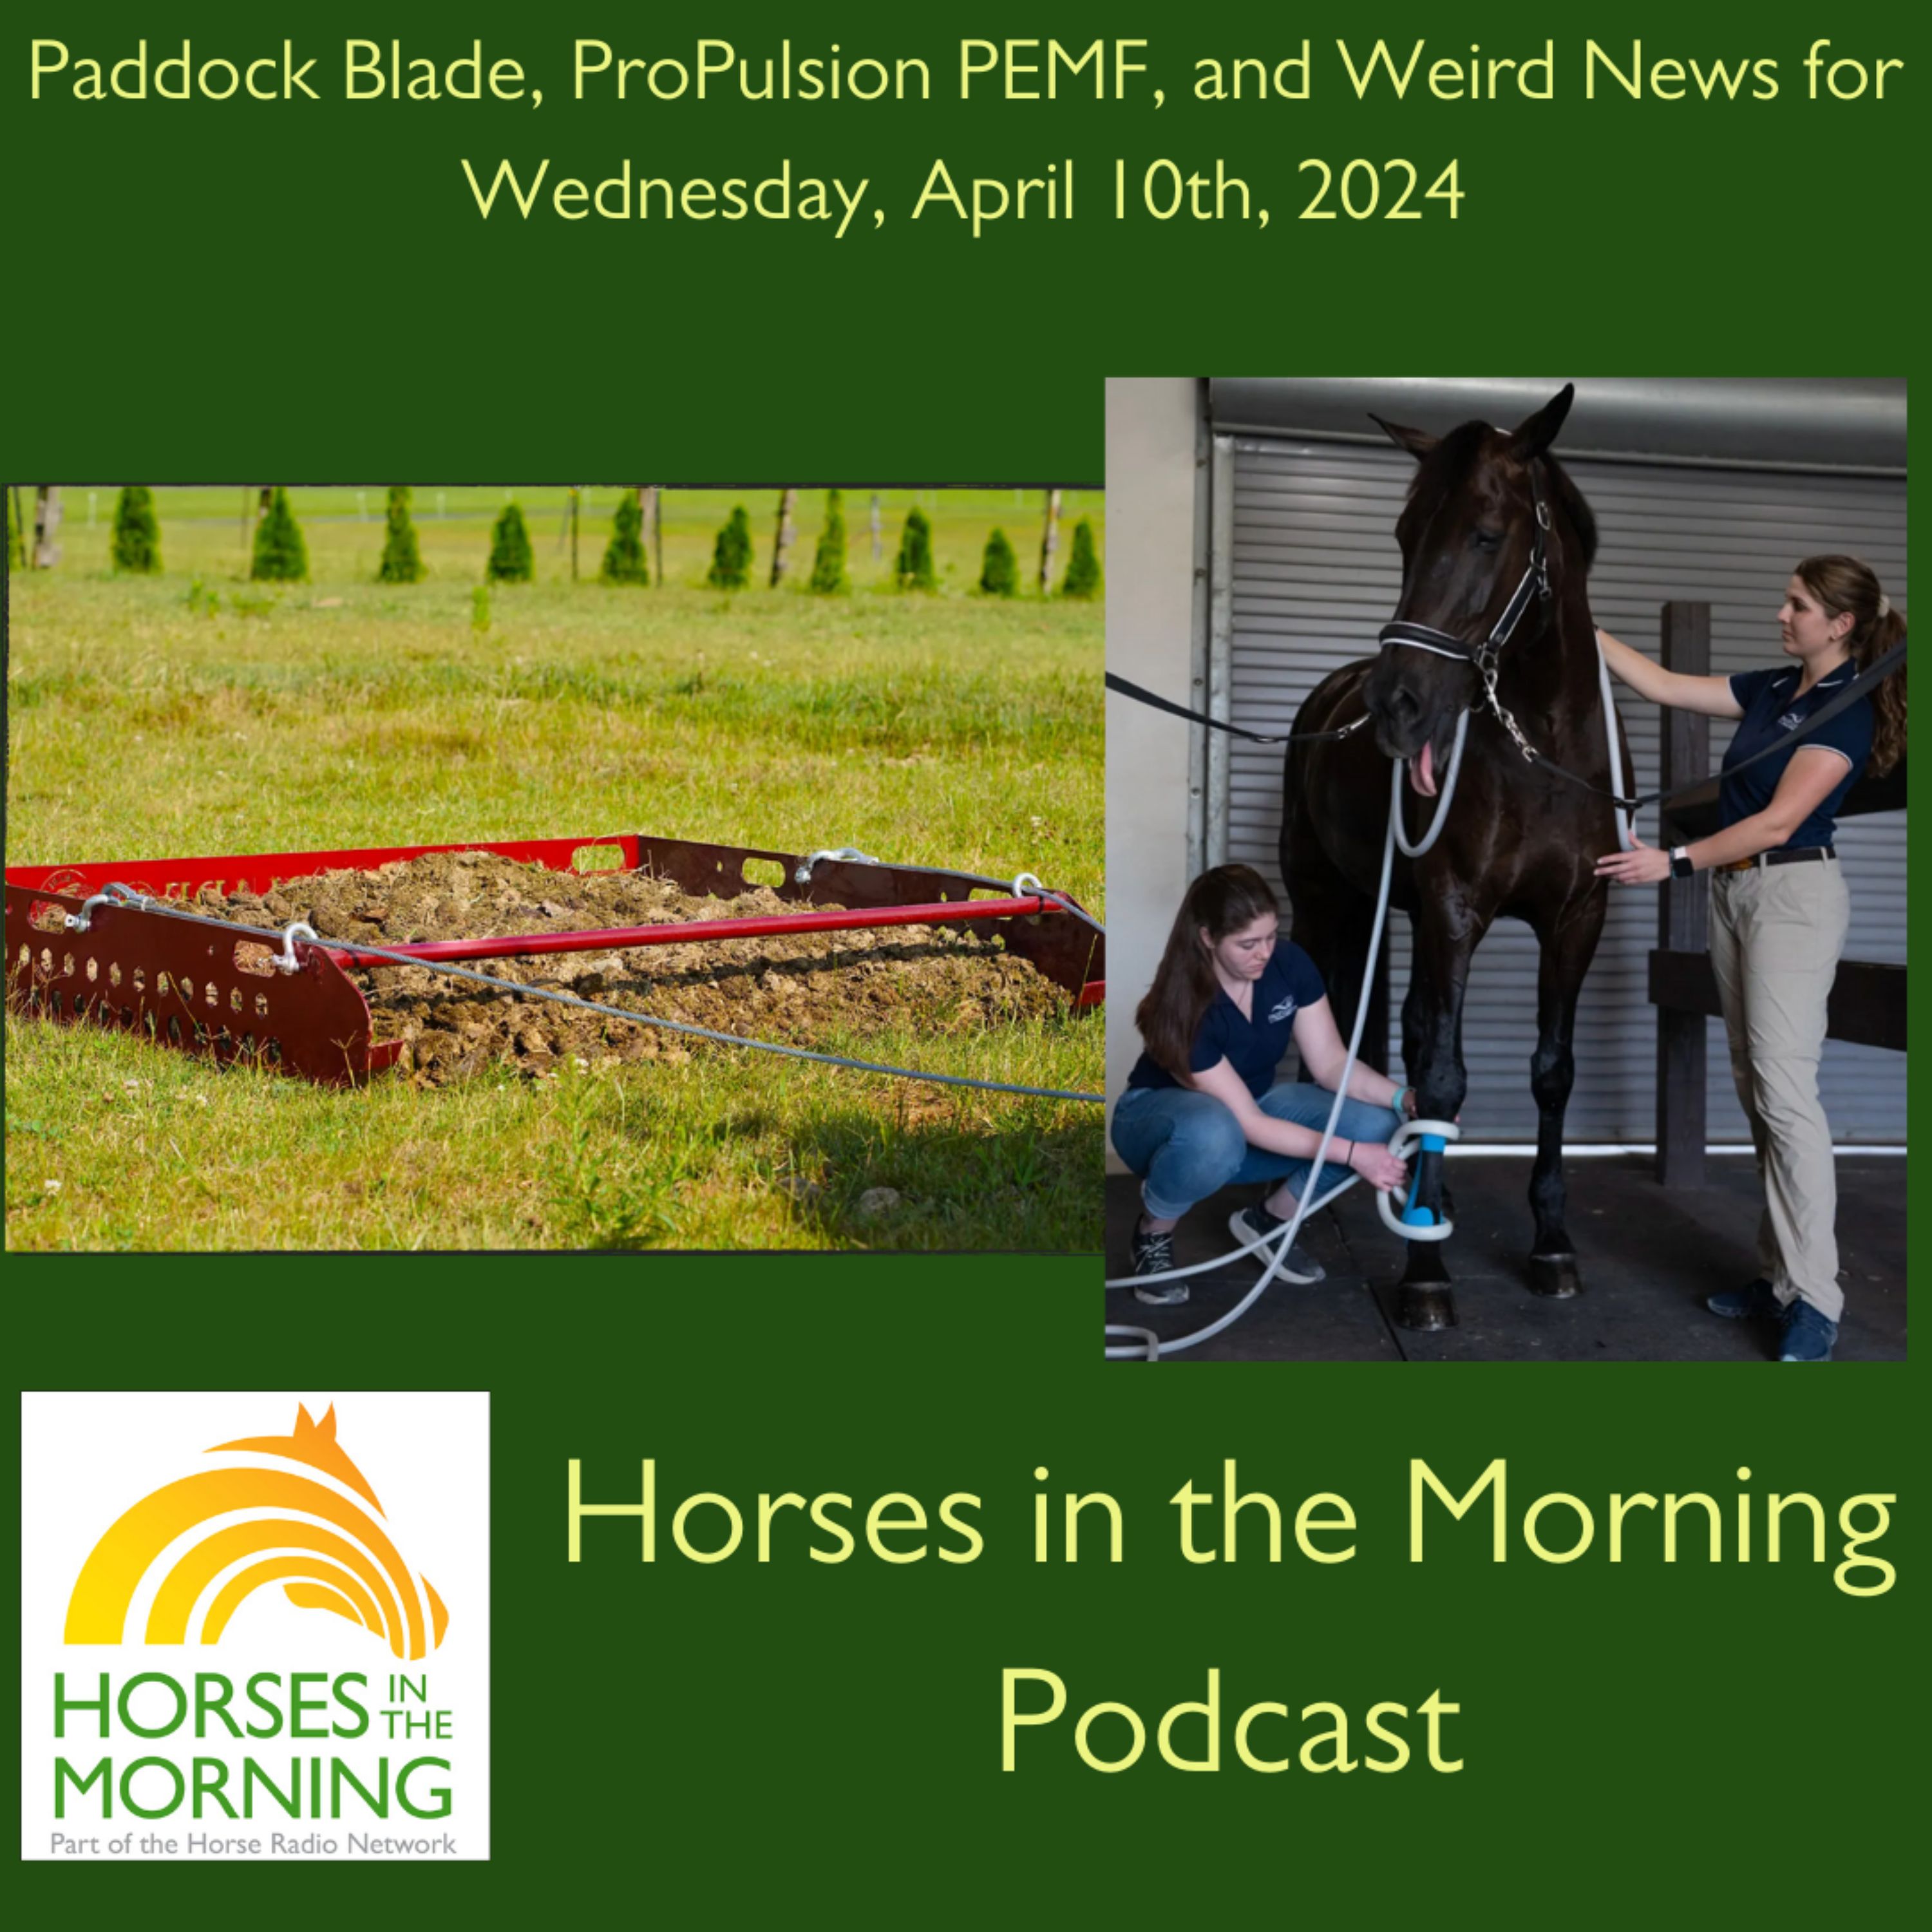 HITM for Wednesday, April 10th 2024: Paddock Blade, ProPulsion PEMF, and Weird News